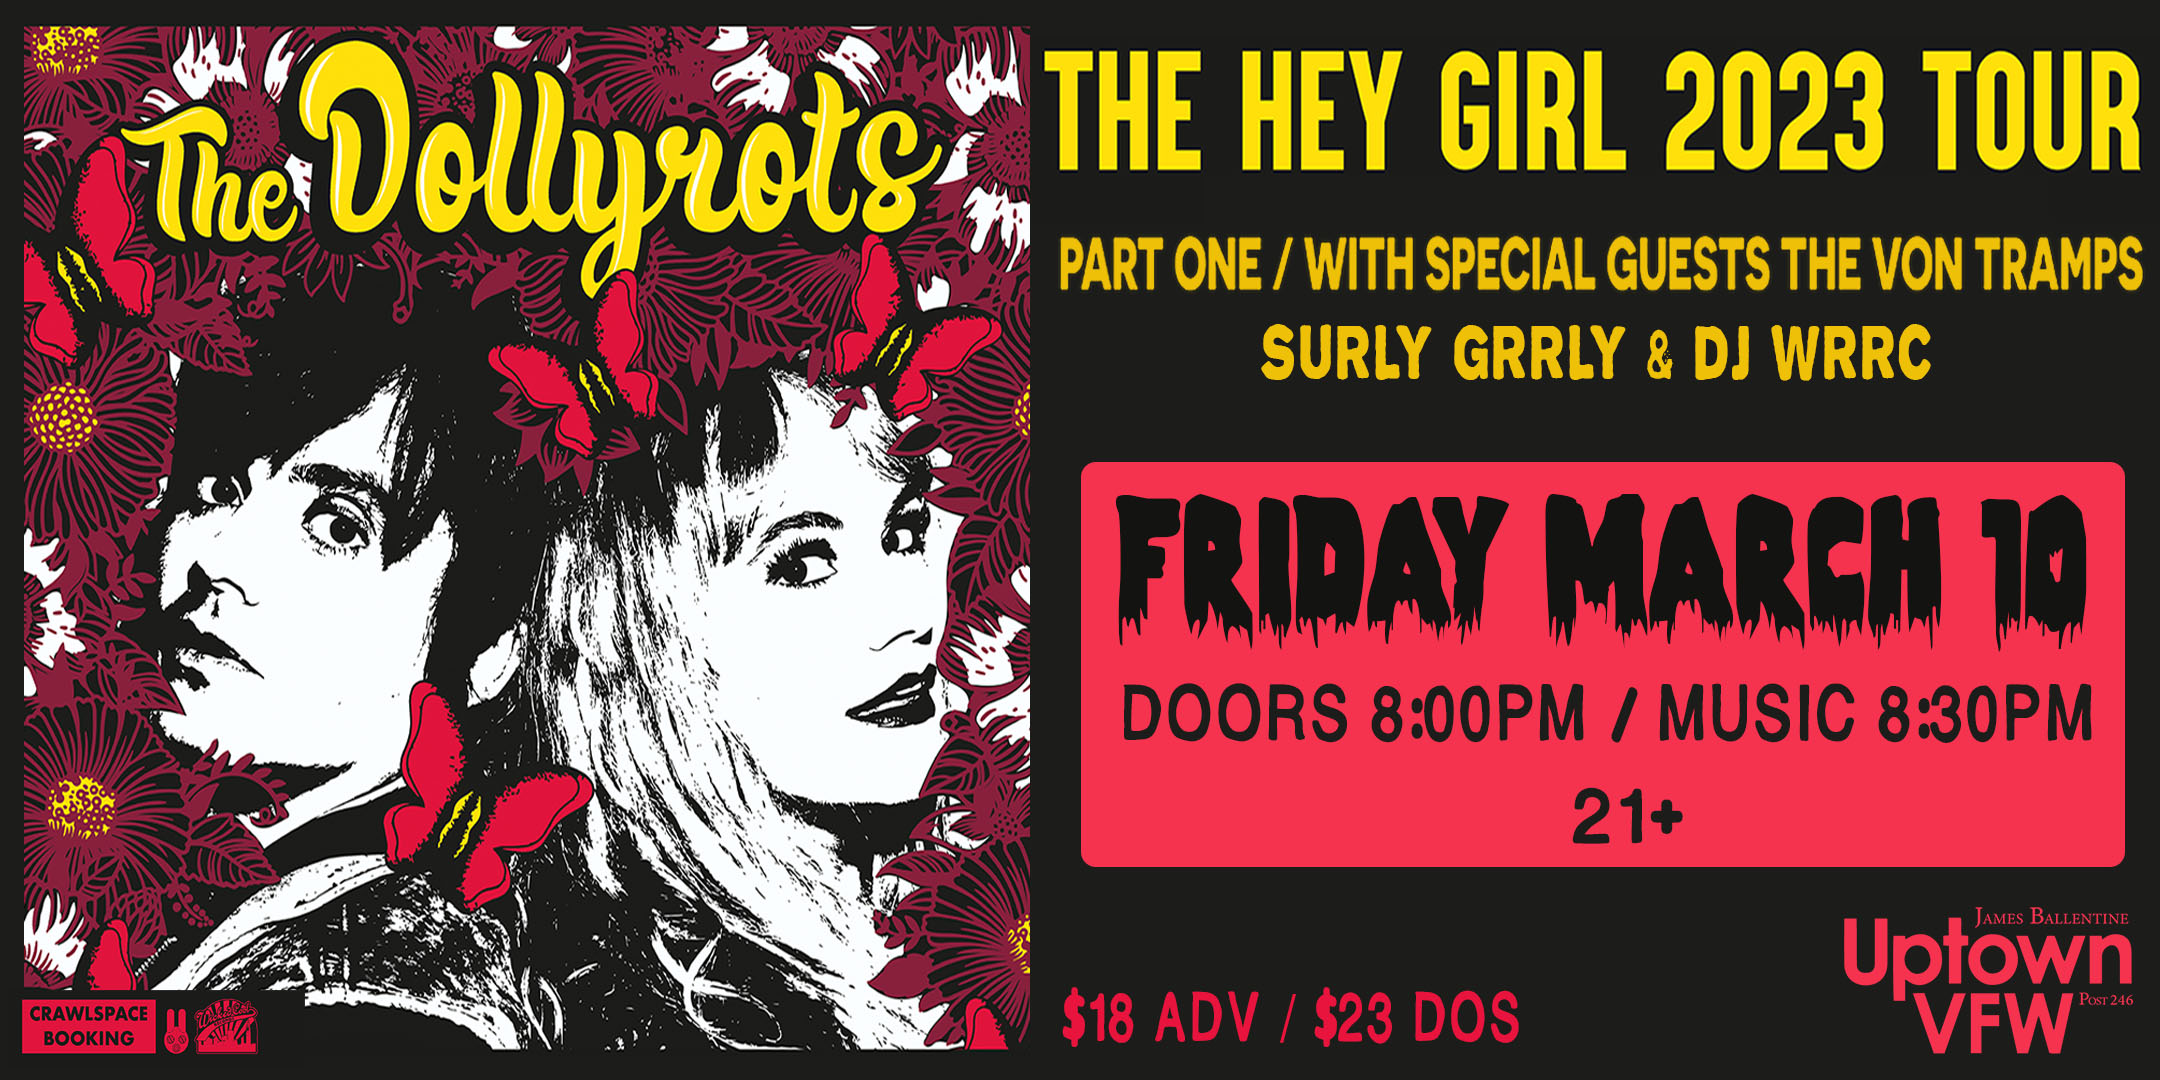 The Hey Girl 2023 Tour THE DOLLYROTS The Von Tramps with special guests Surly Grrly DJ WRRC Friday, March 10 James Ballentine "Uptown" VFW Post 246 Doors 8:00pm :: Music 8:30pm :: 21+ GA $18 ADV / $23 DOS NO REFUNDS